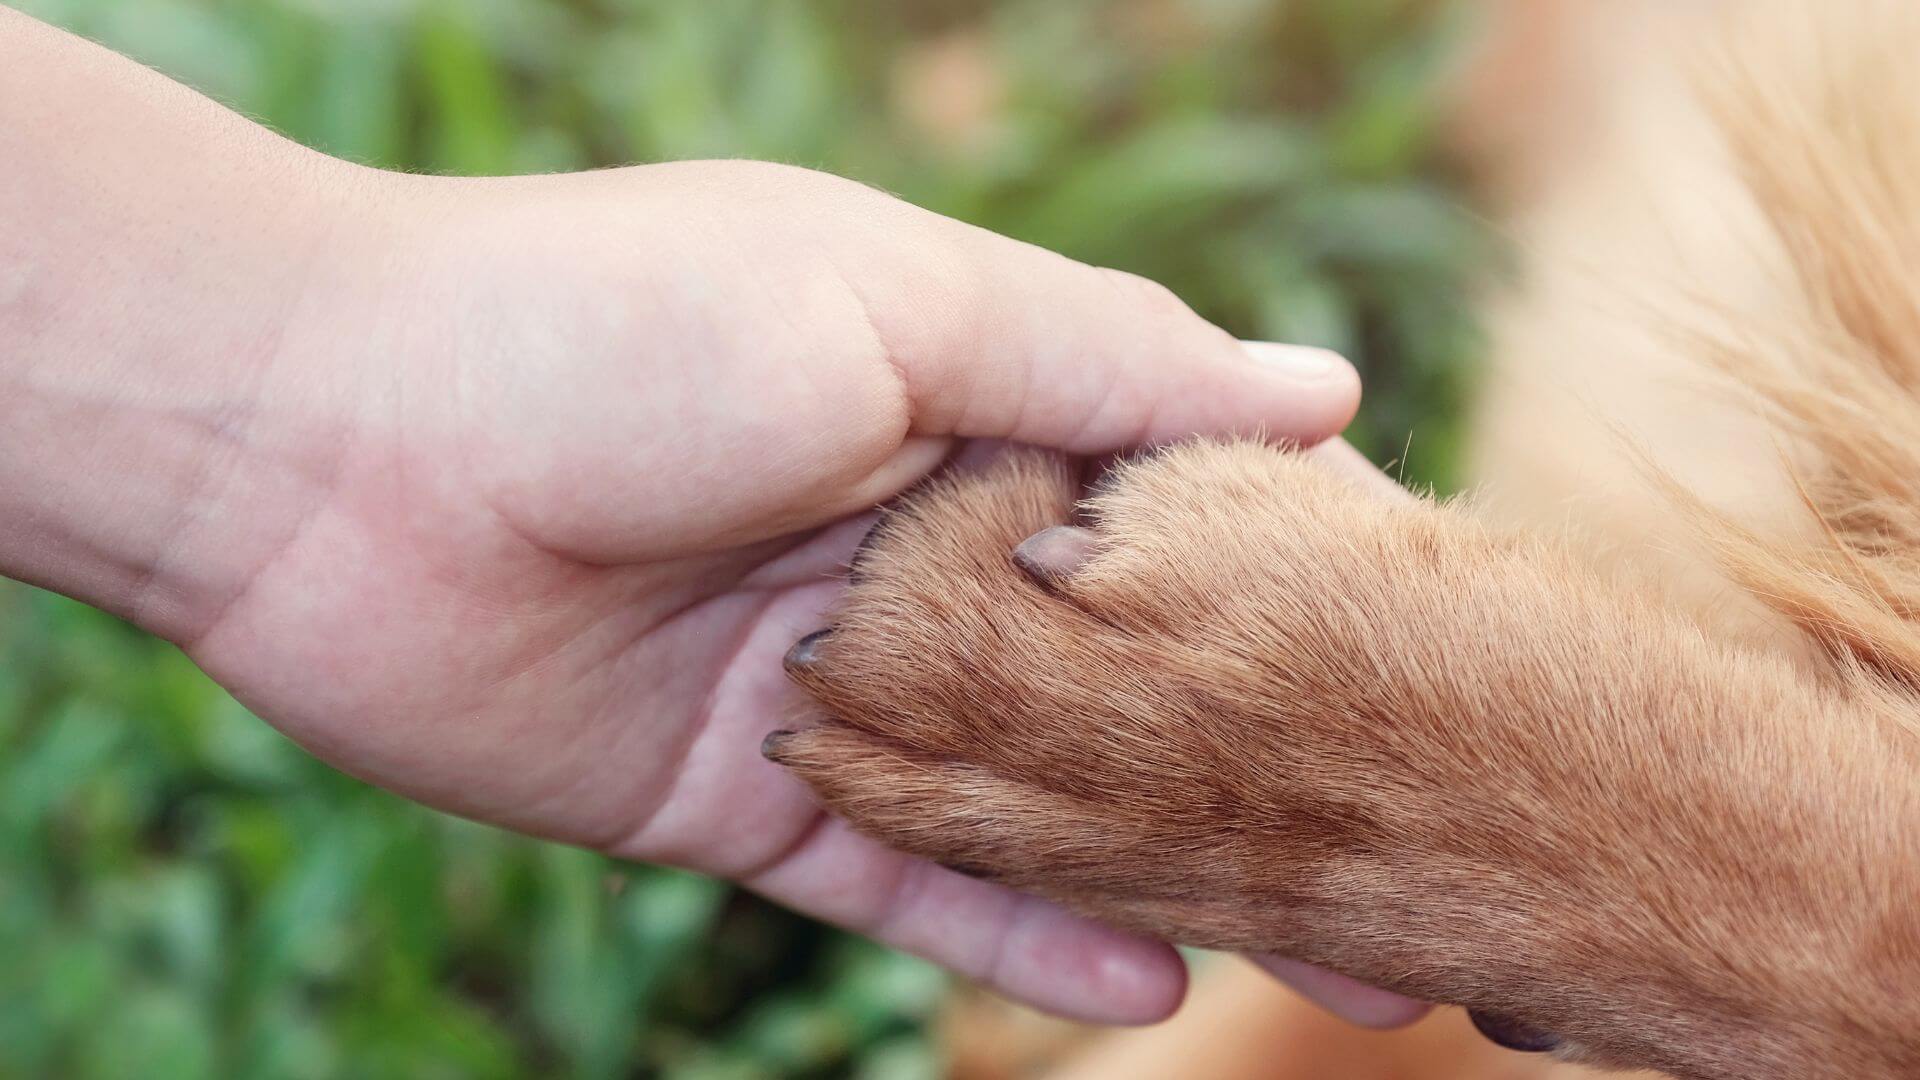 A person gently holding the paw of a dog